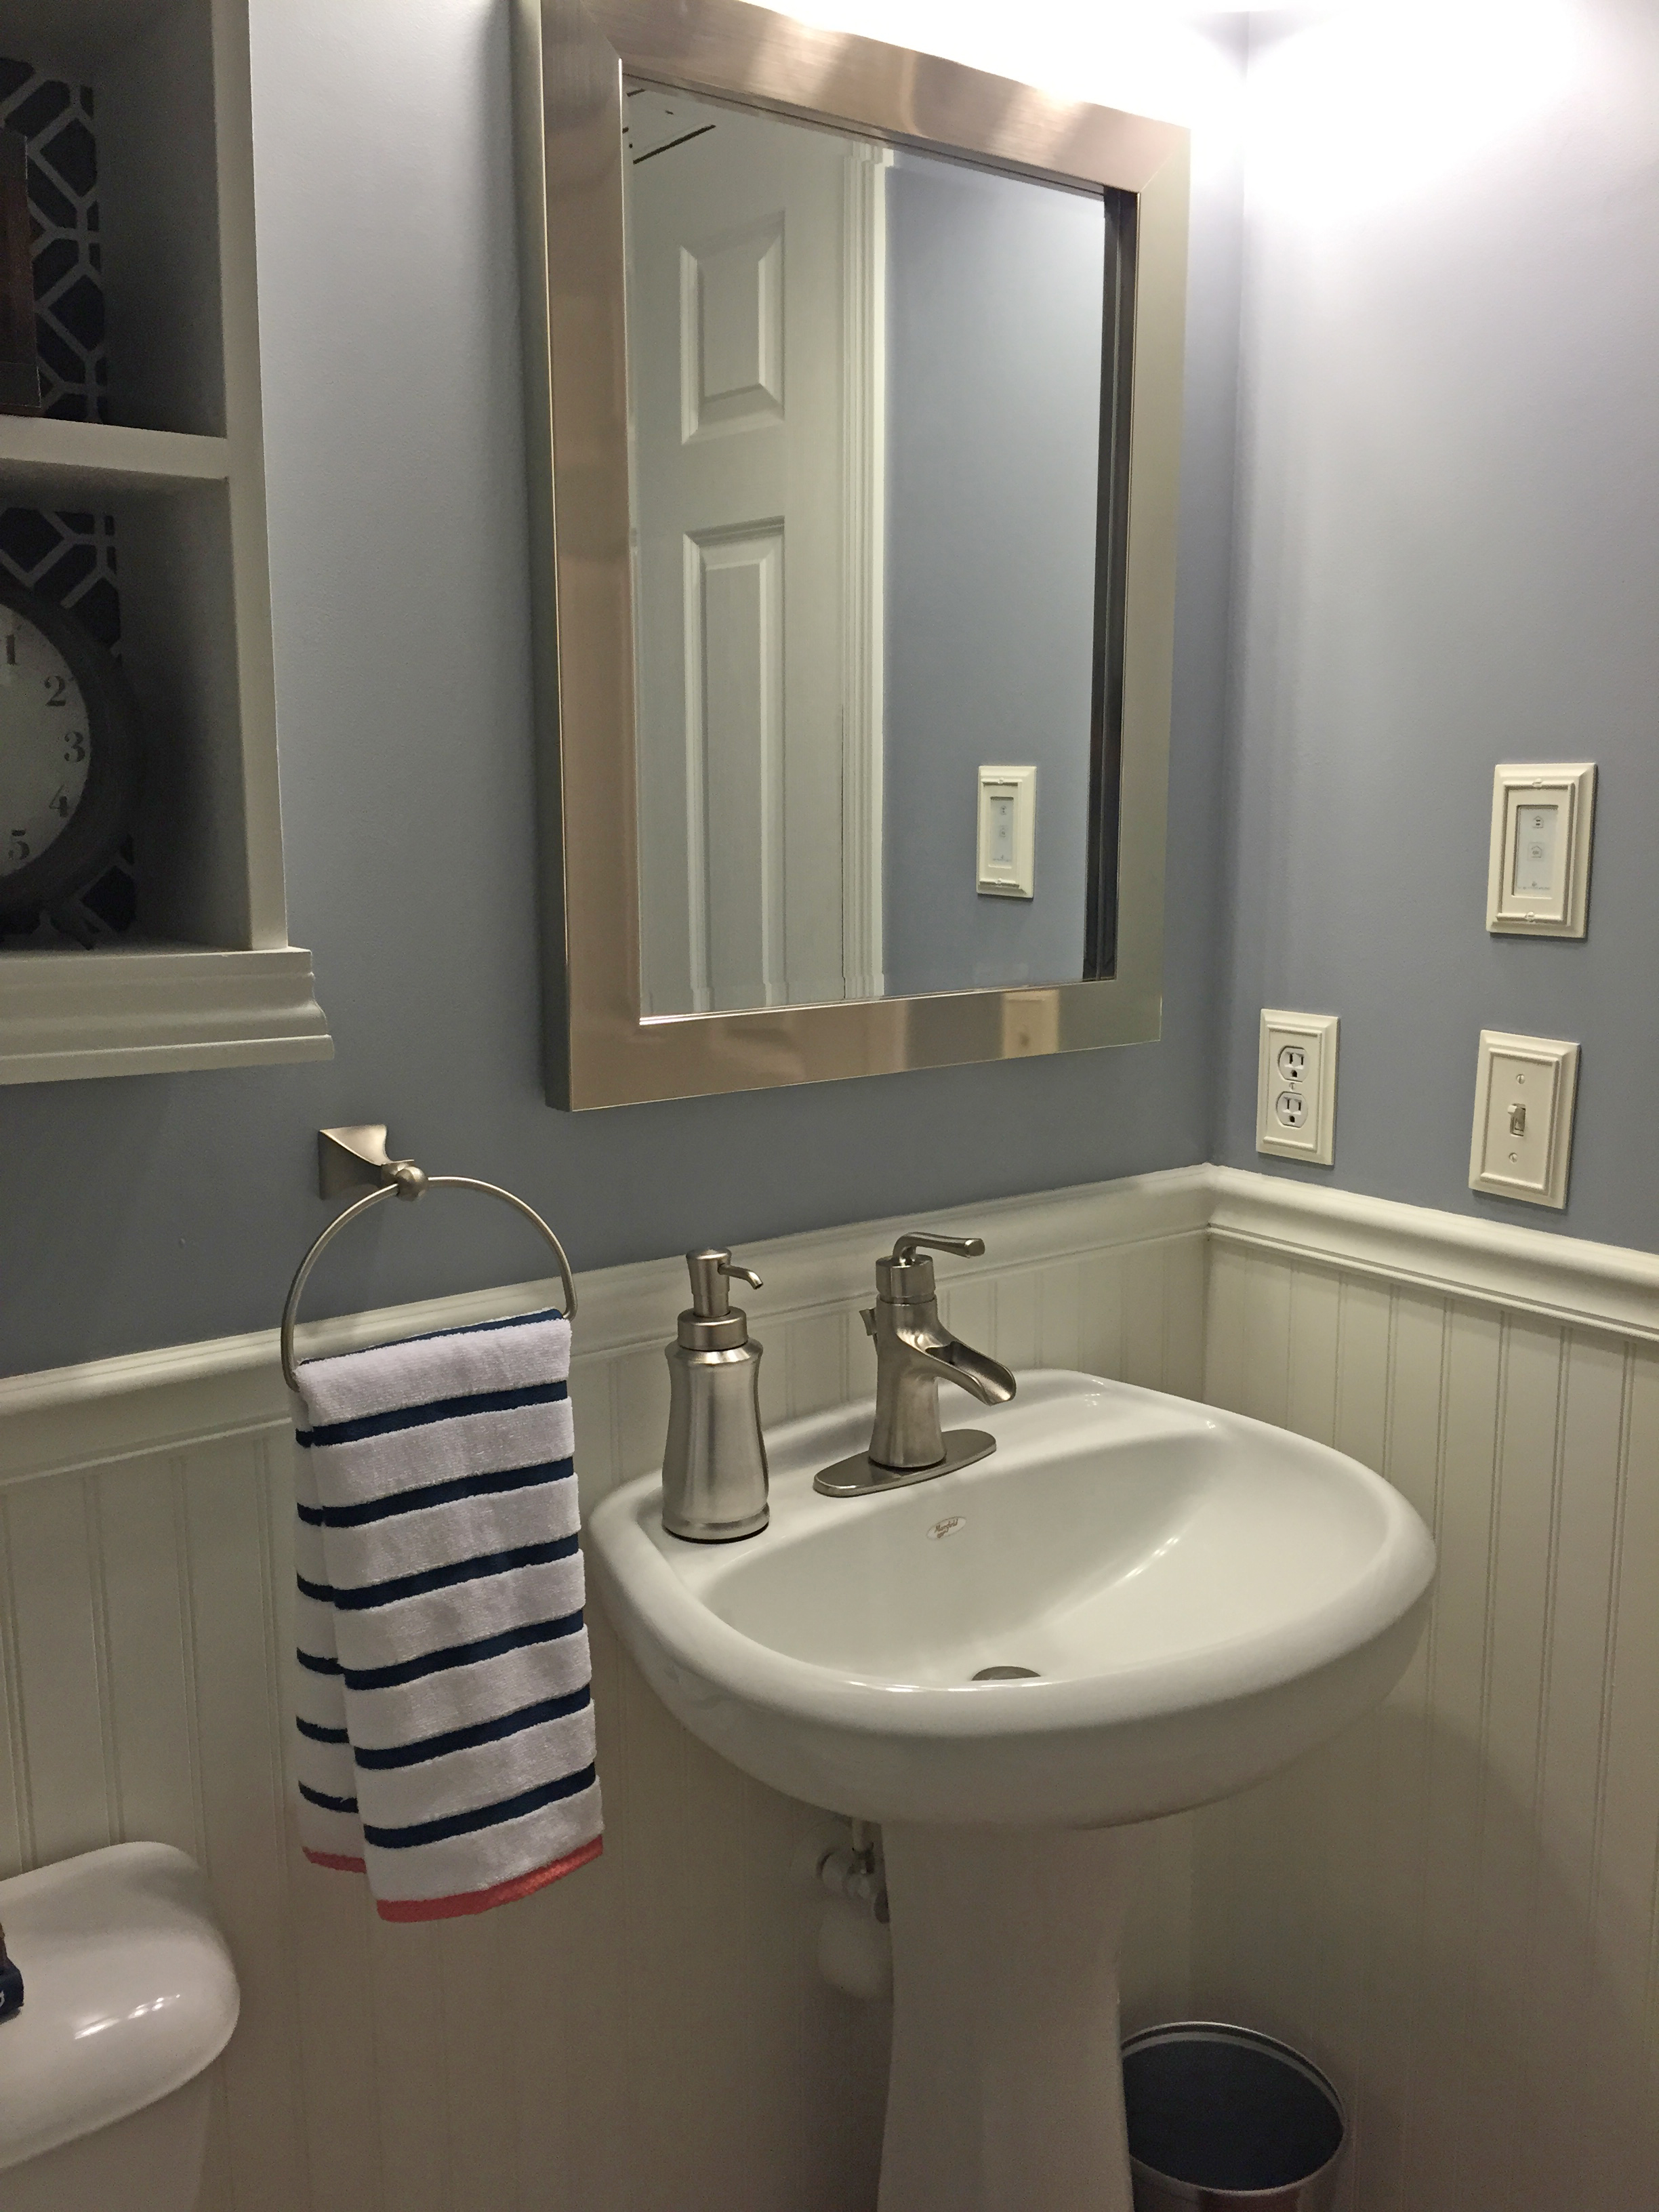 Powder Room Makeover with view of pedestal sink with new faucet, new mirror, and towel holder with stripped towel